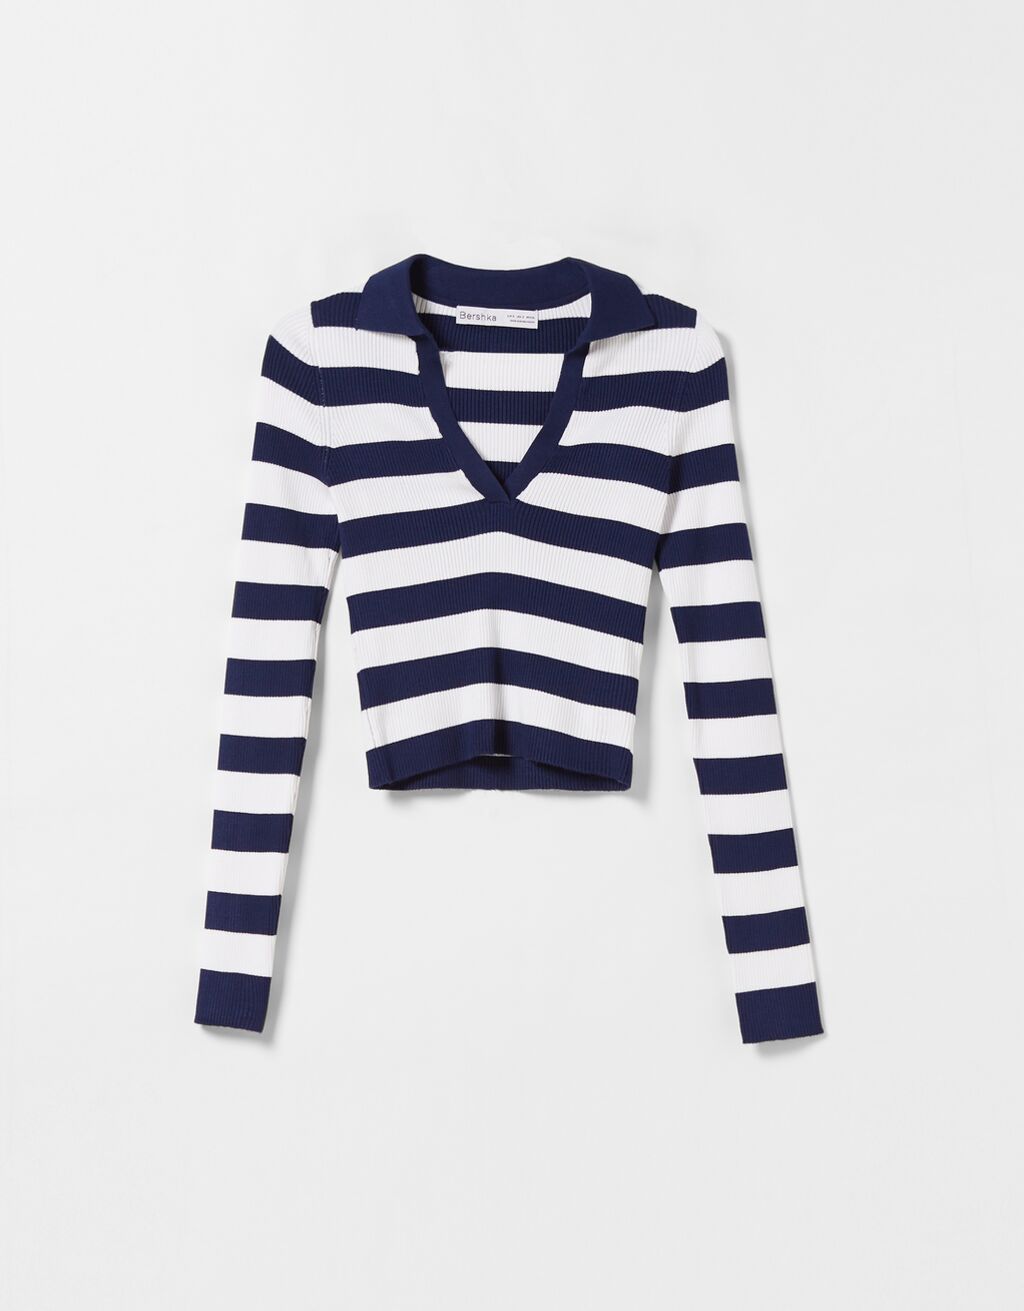 Ribbed knit top with stripes and polo collar